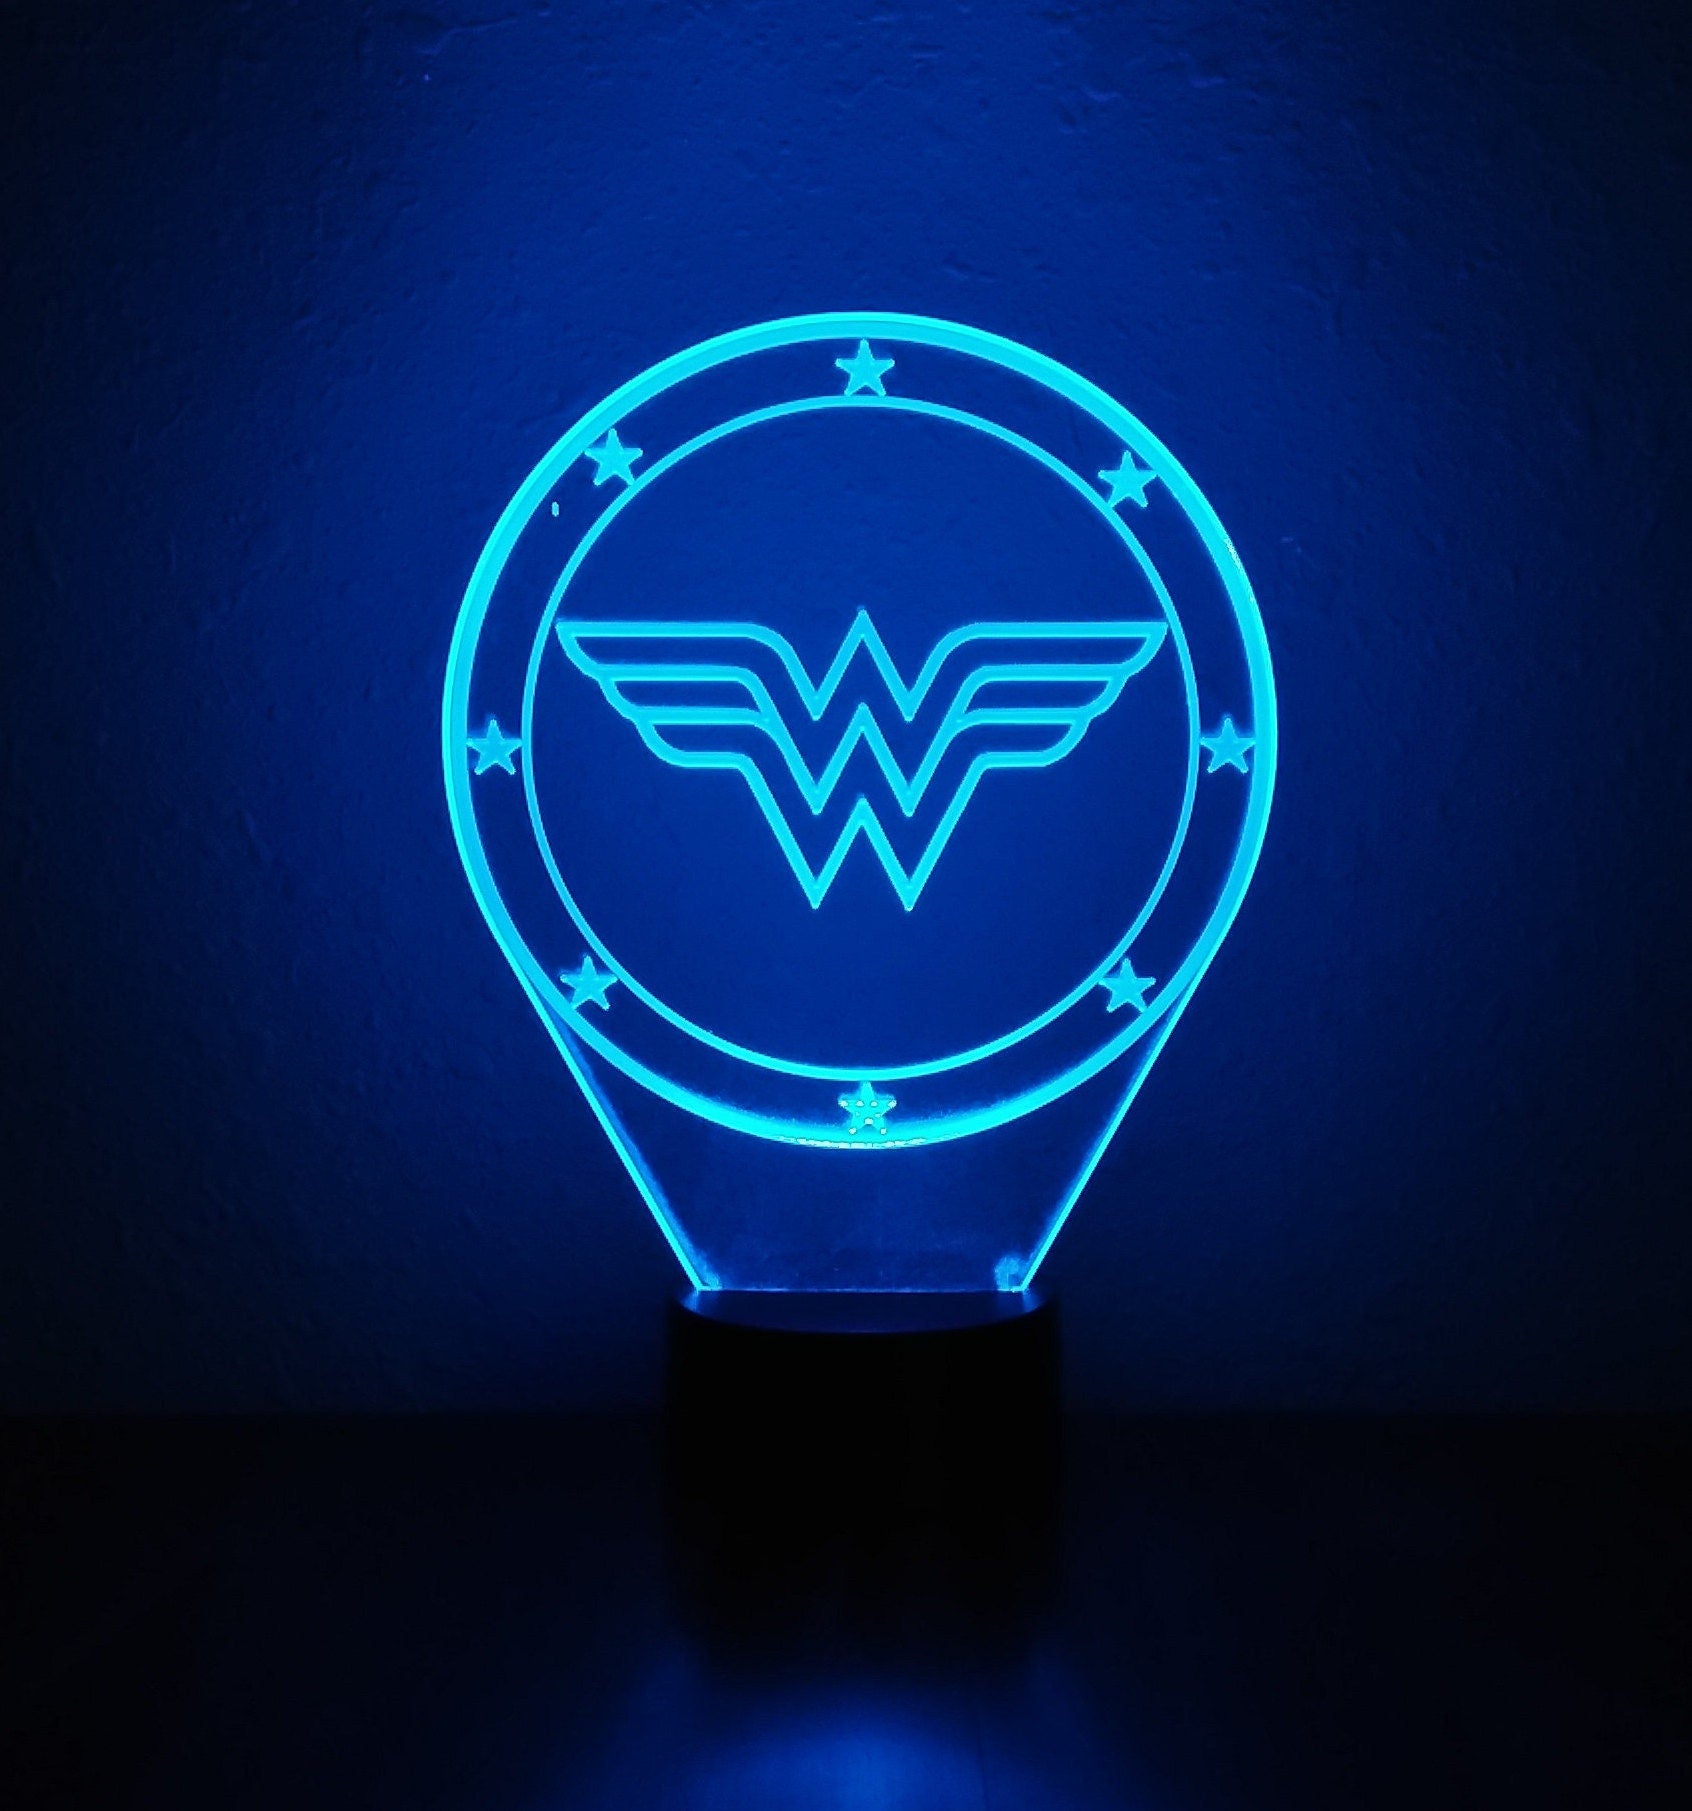 Awesome "Wonder Woman" 3D LED Lamp (1255) - FREE SHIPPING!